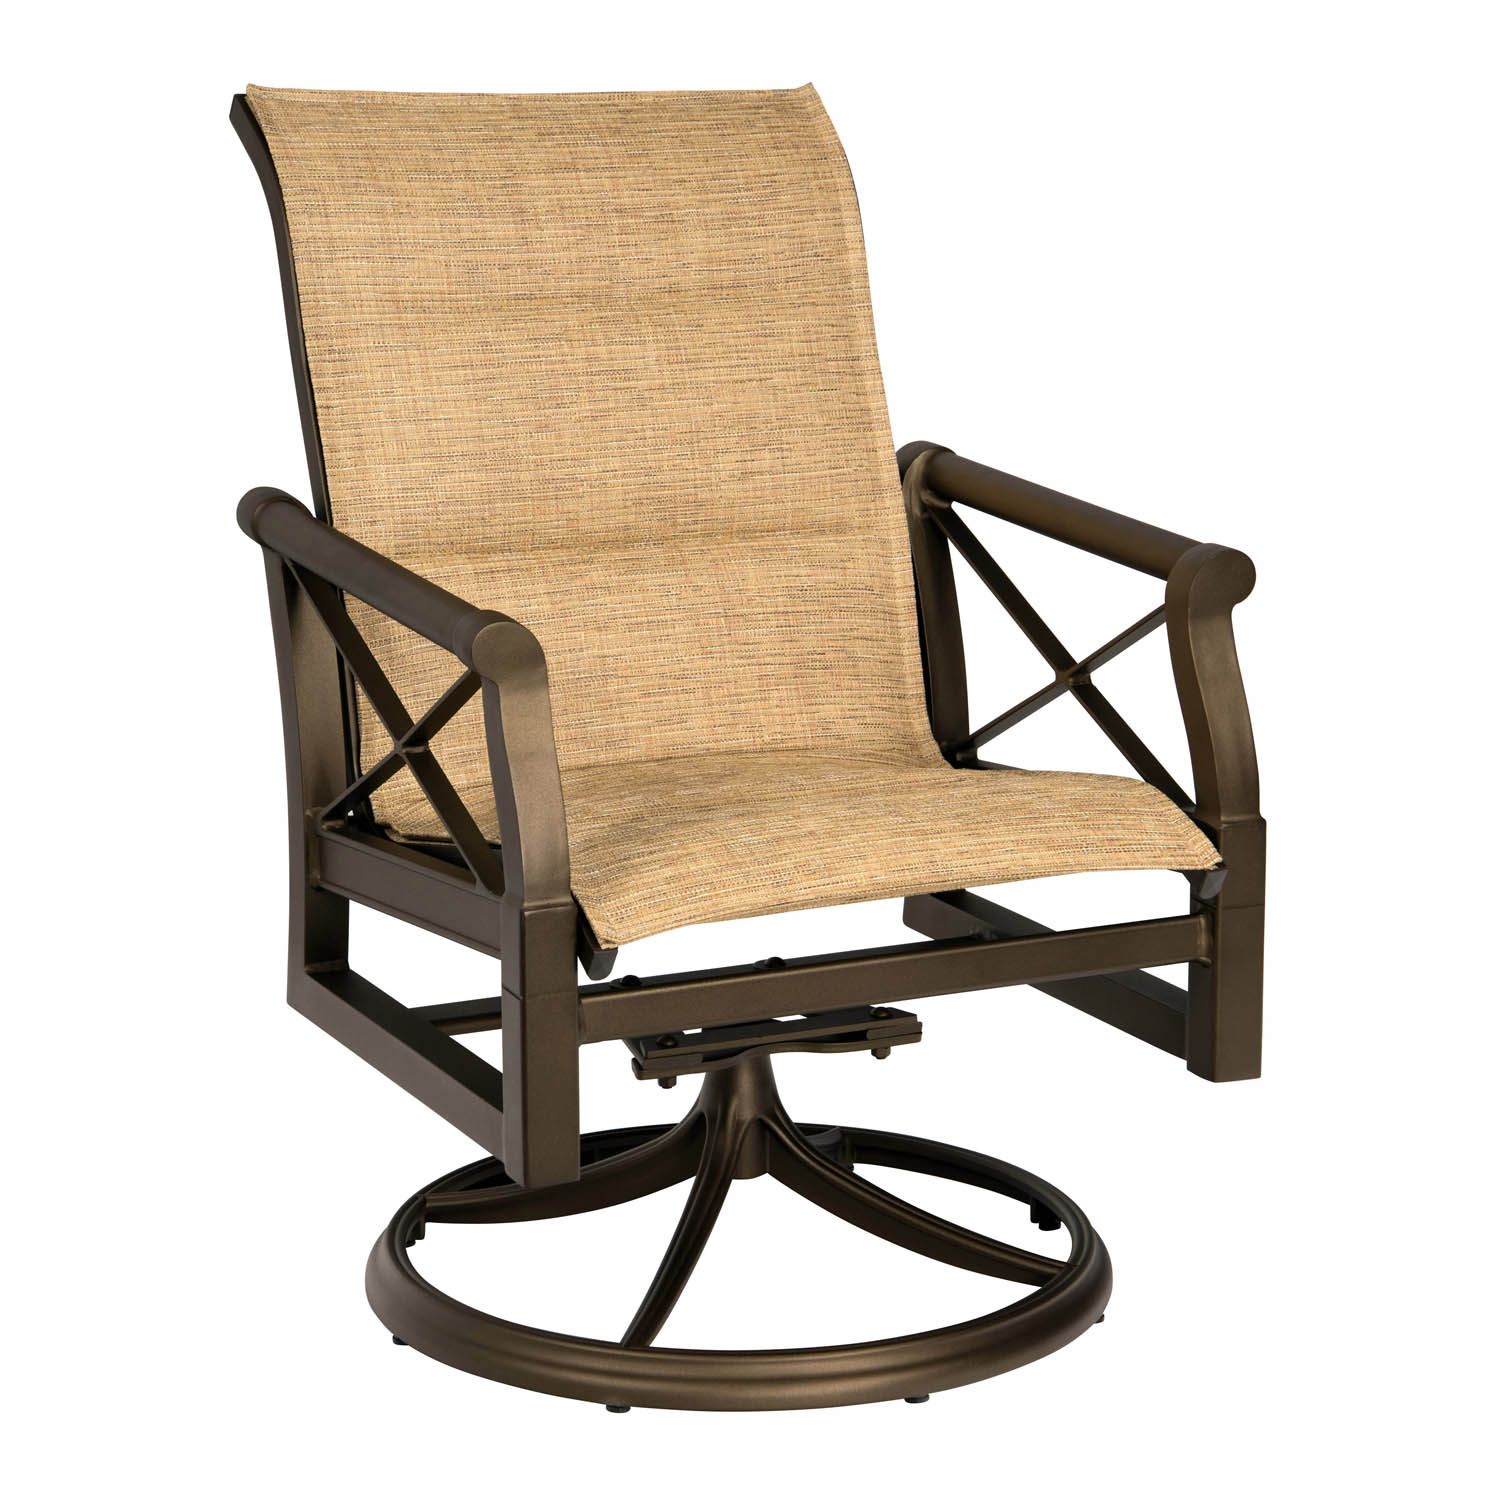 Andover Padded Sling Swivel Rocking Dincing Armchair By Woodard